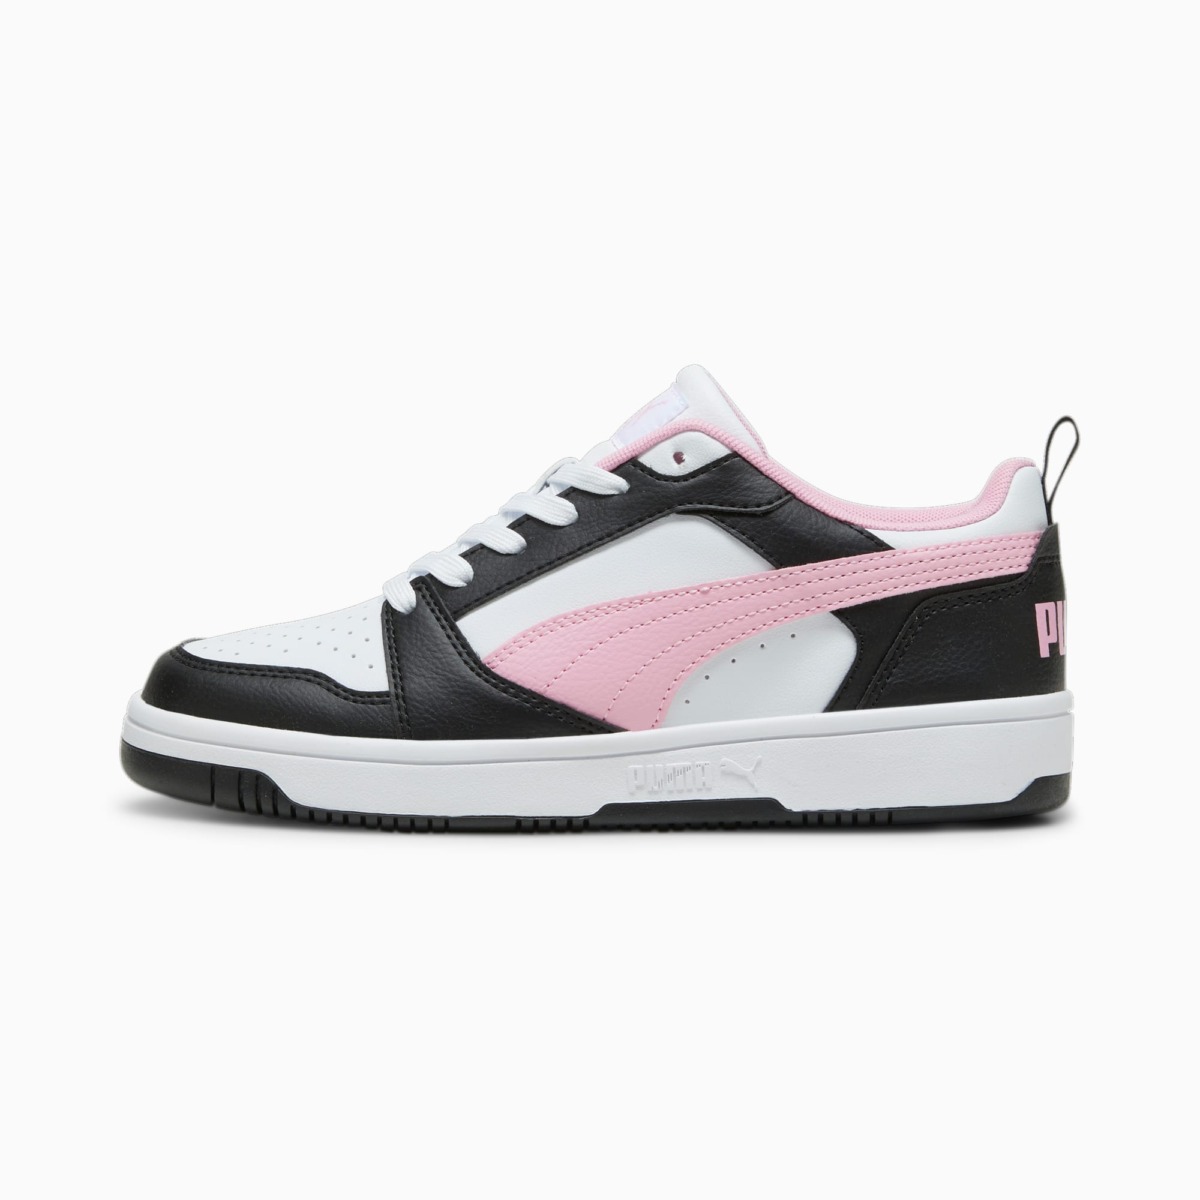 Women's Sneakers in Pink at Puma GOOFASH